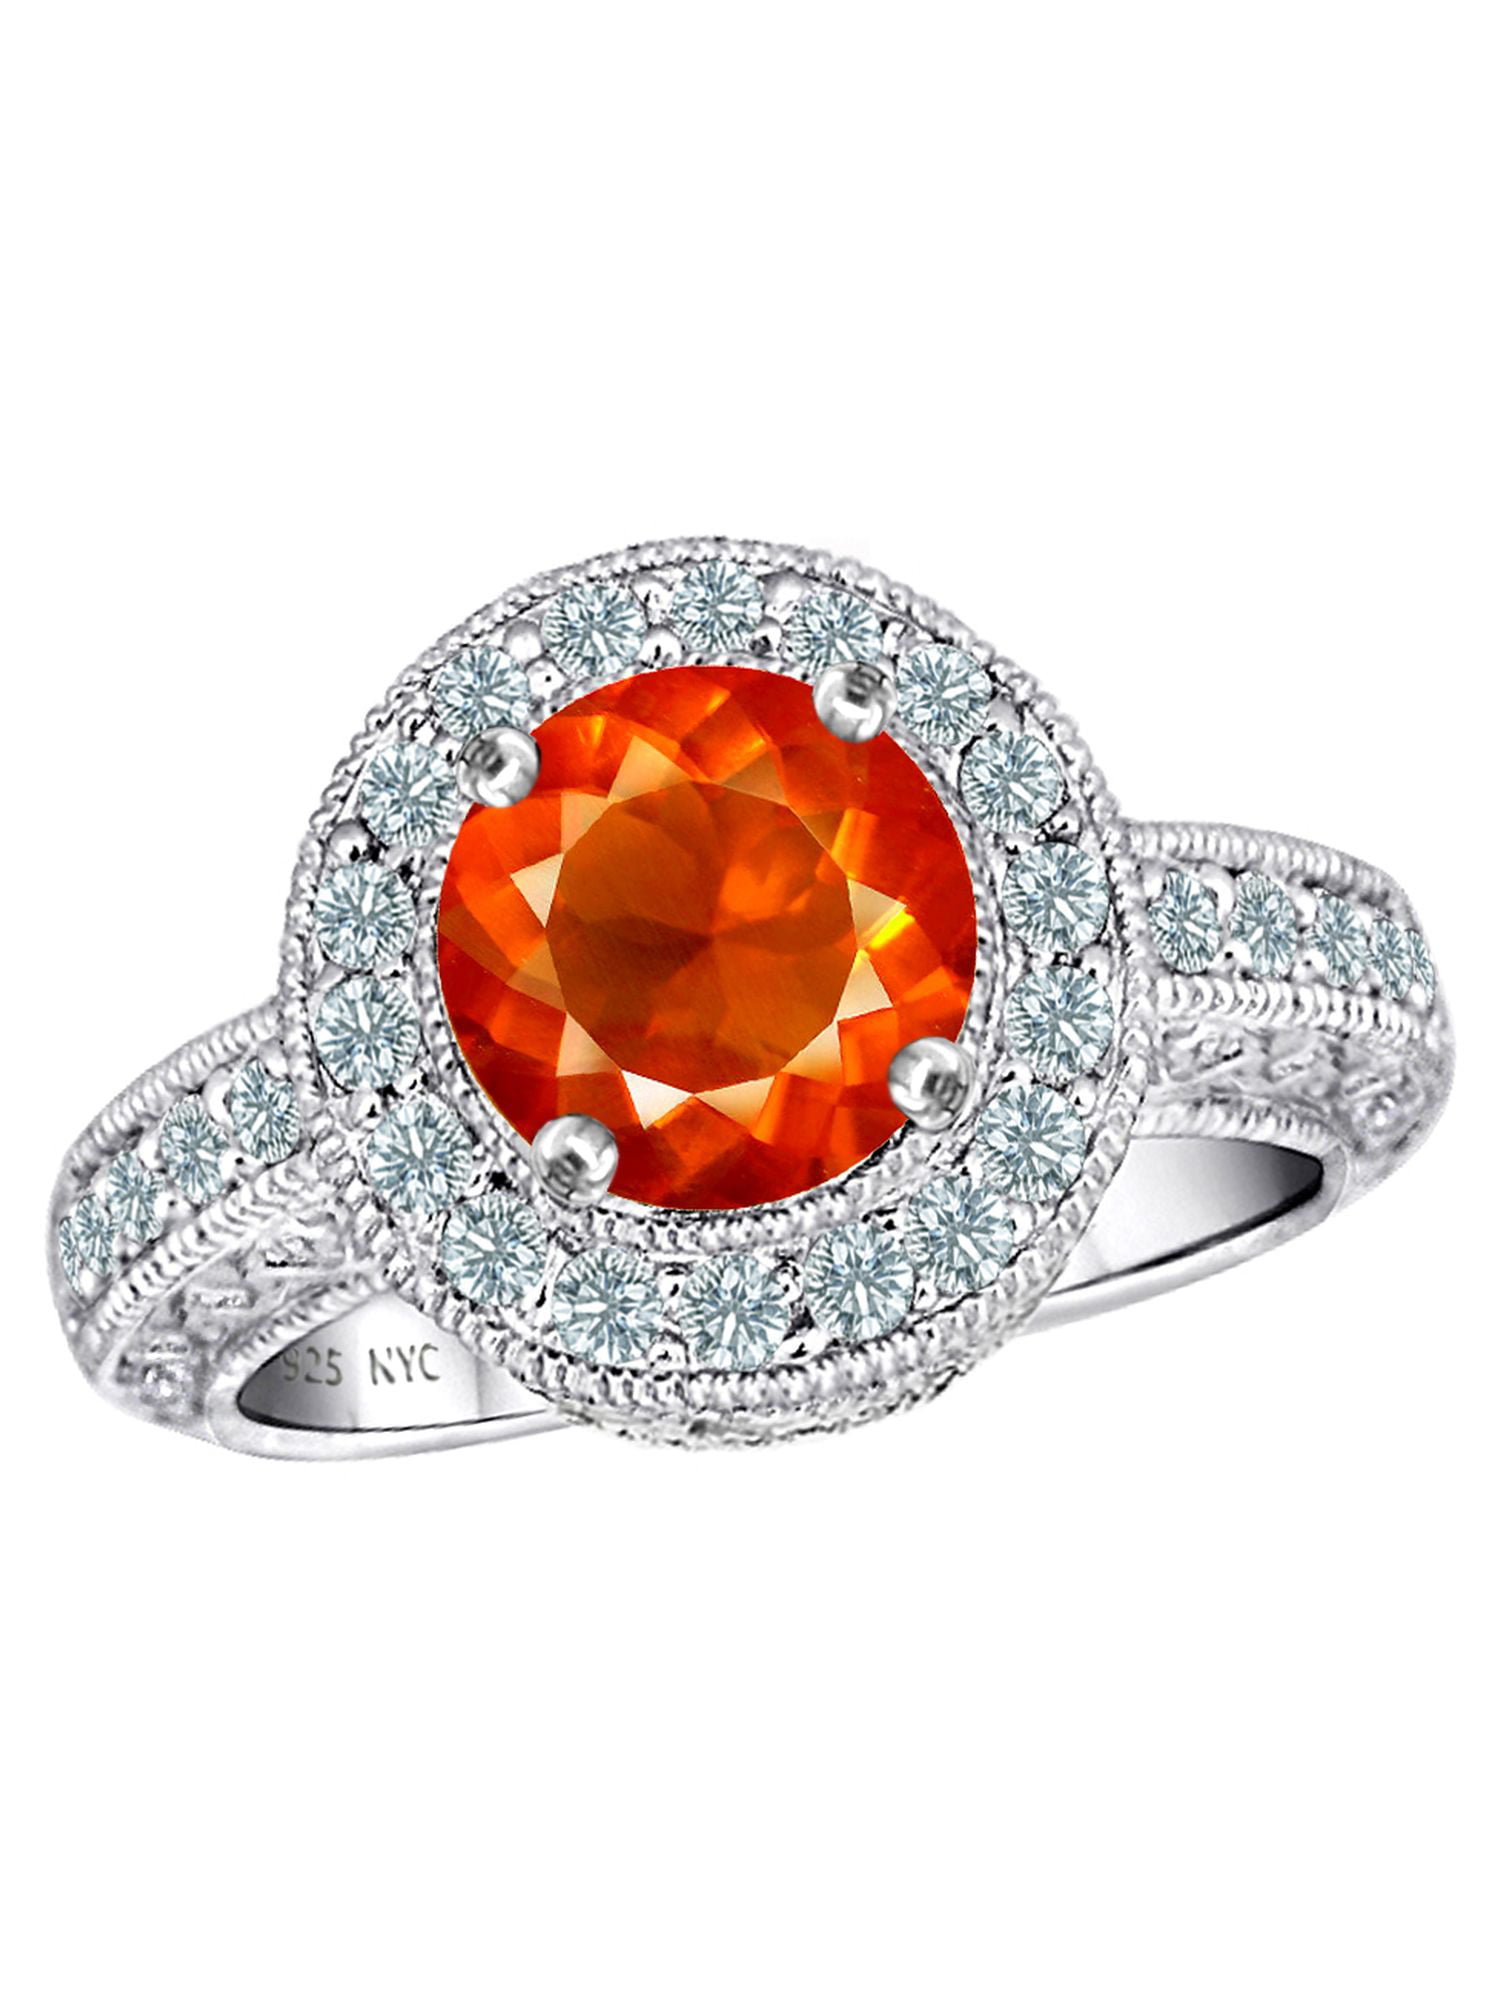 Round Mexican Orange Fire Opal Genuine Sterling Silver Engagement Ring Set 